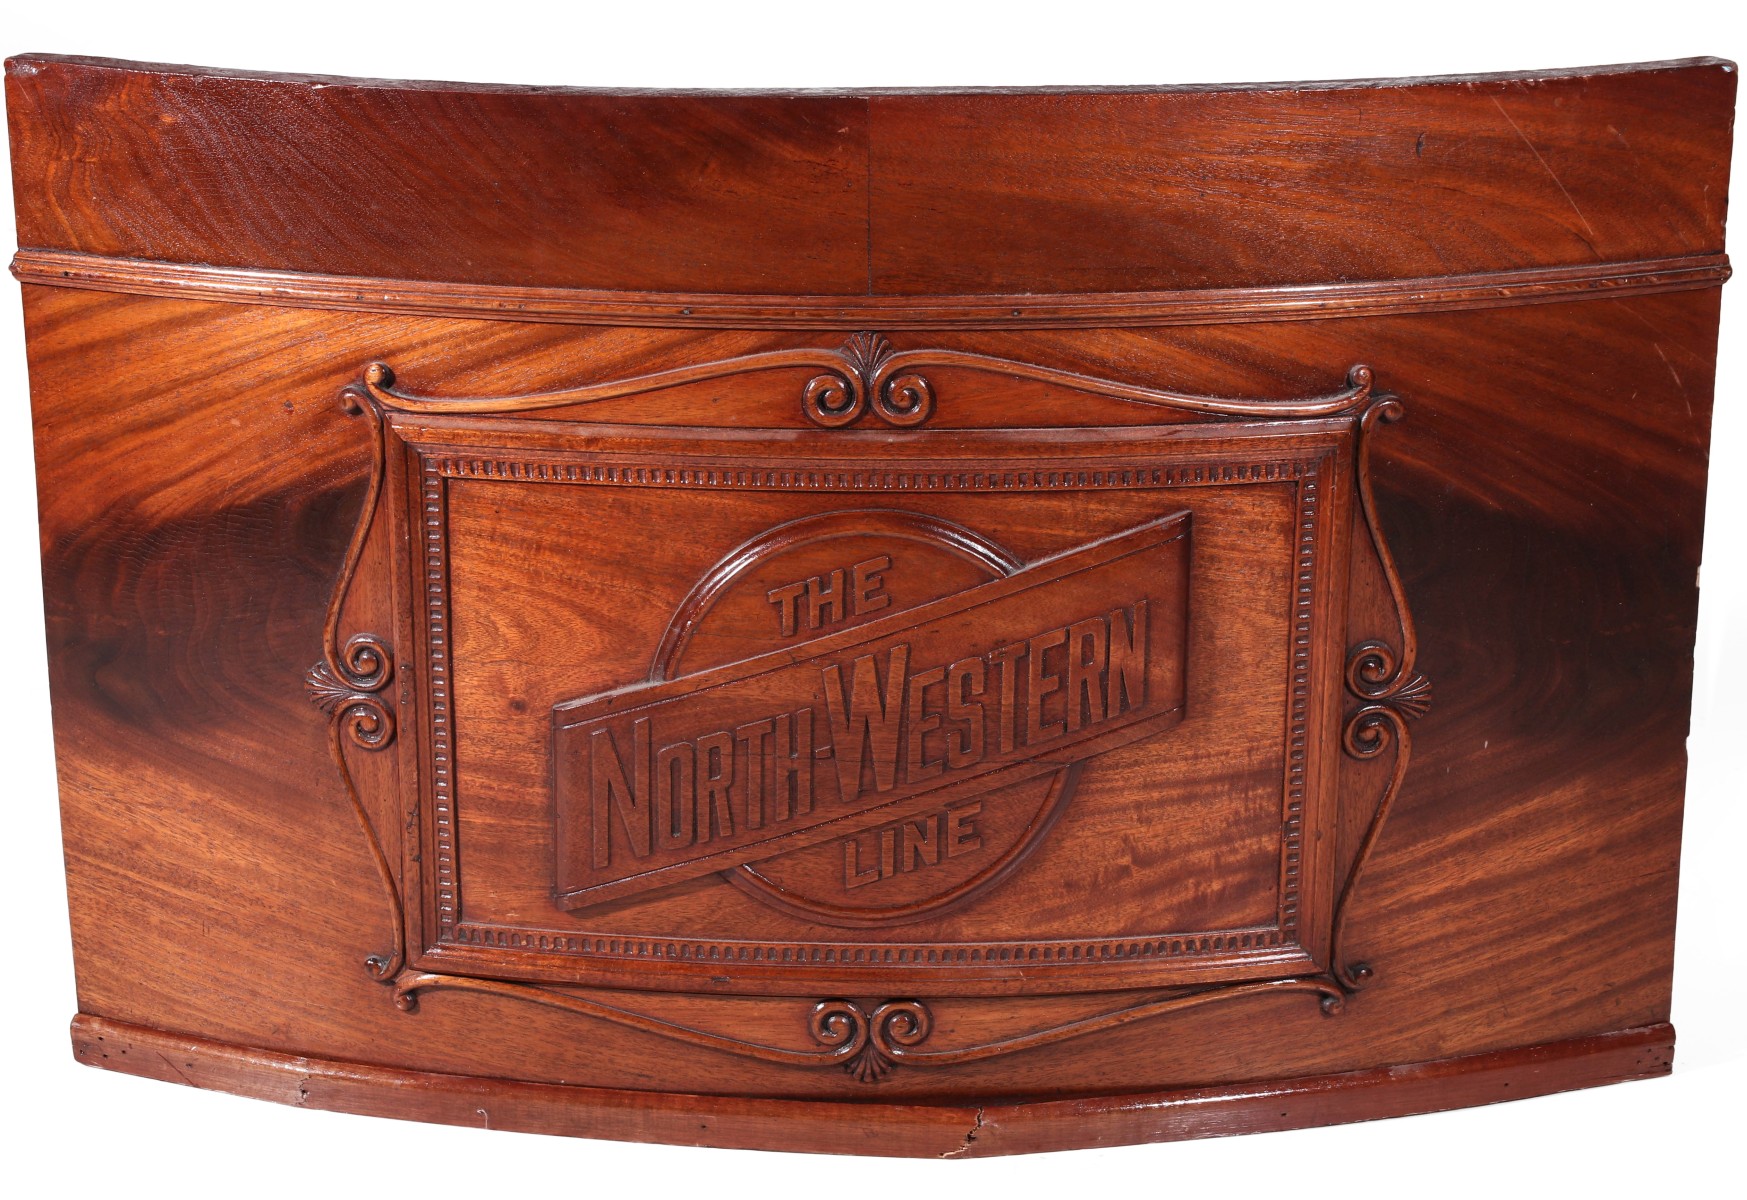 A NORTH-WESTERN LINE MAHOGANY ARCHITECTURAL ELEMENT